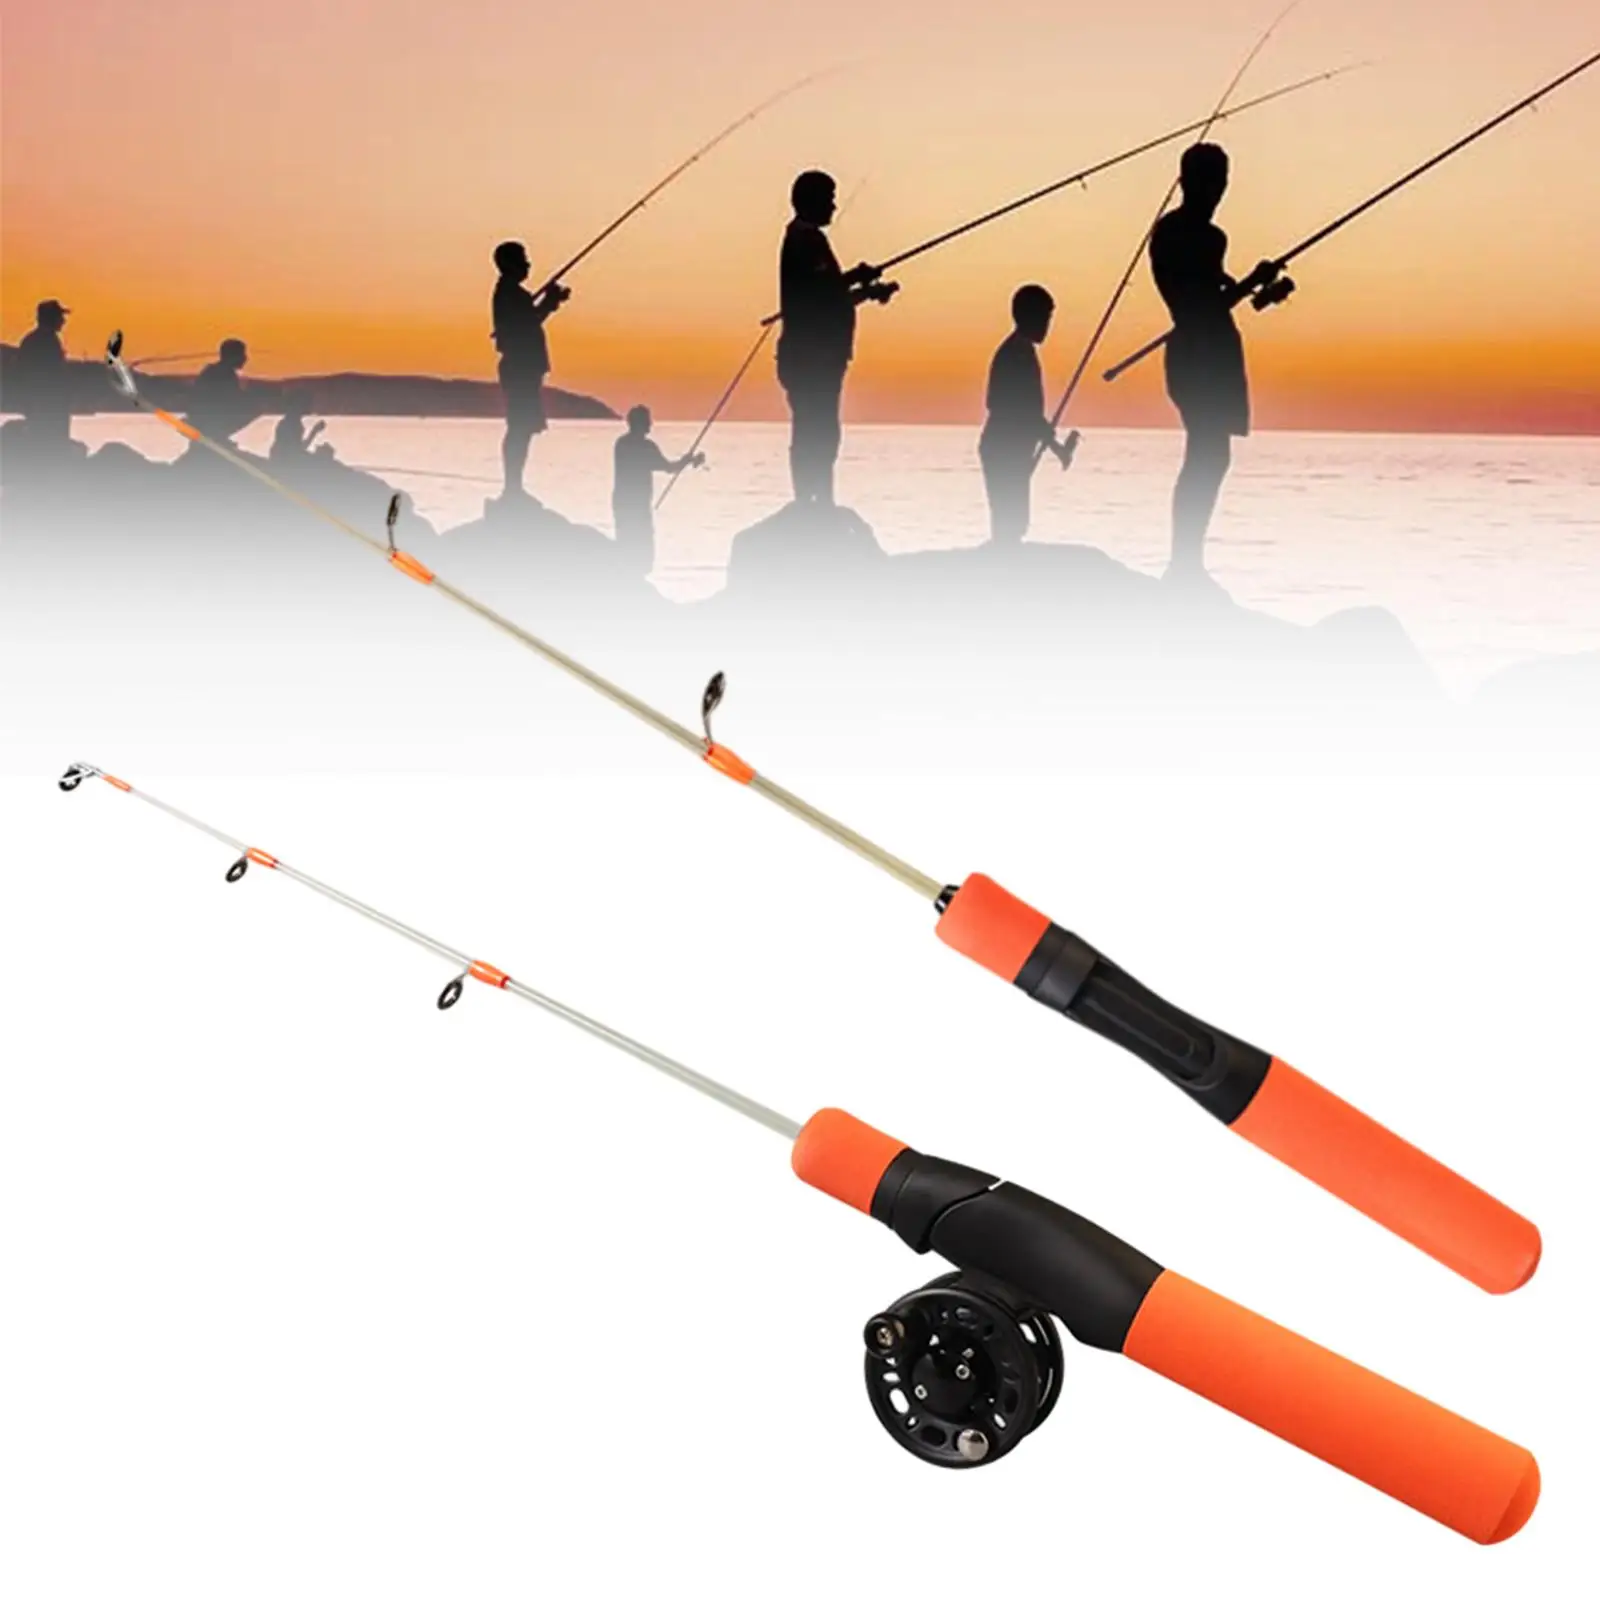 Ice Fishing Pole Portable Comfortable Grip Fishing Accessory Practical Fishing Tackle Fishing Tools for Outdoor River Fishing